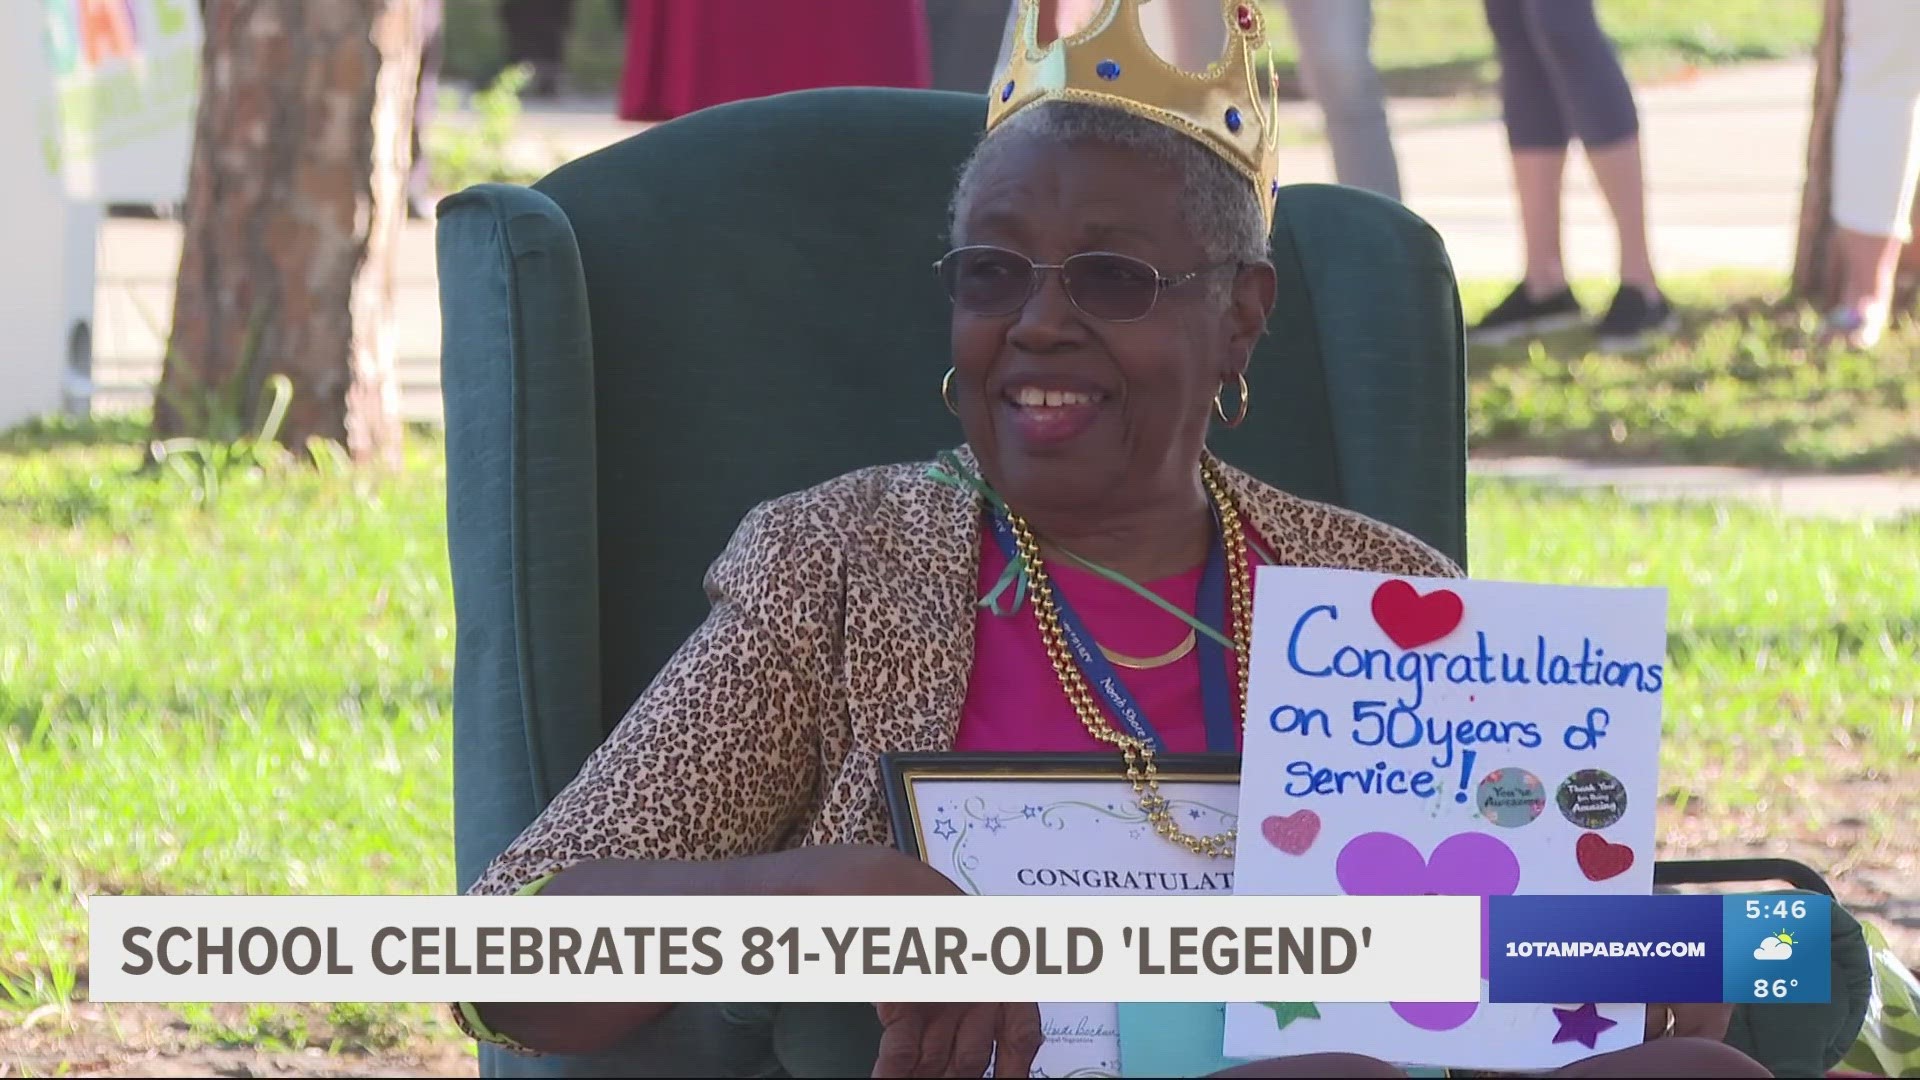 The 81-year-old "legend" known as "Grandma McCree" was crowned queen for a day.